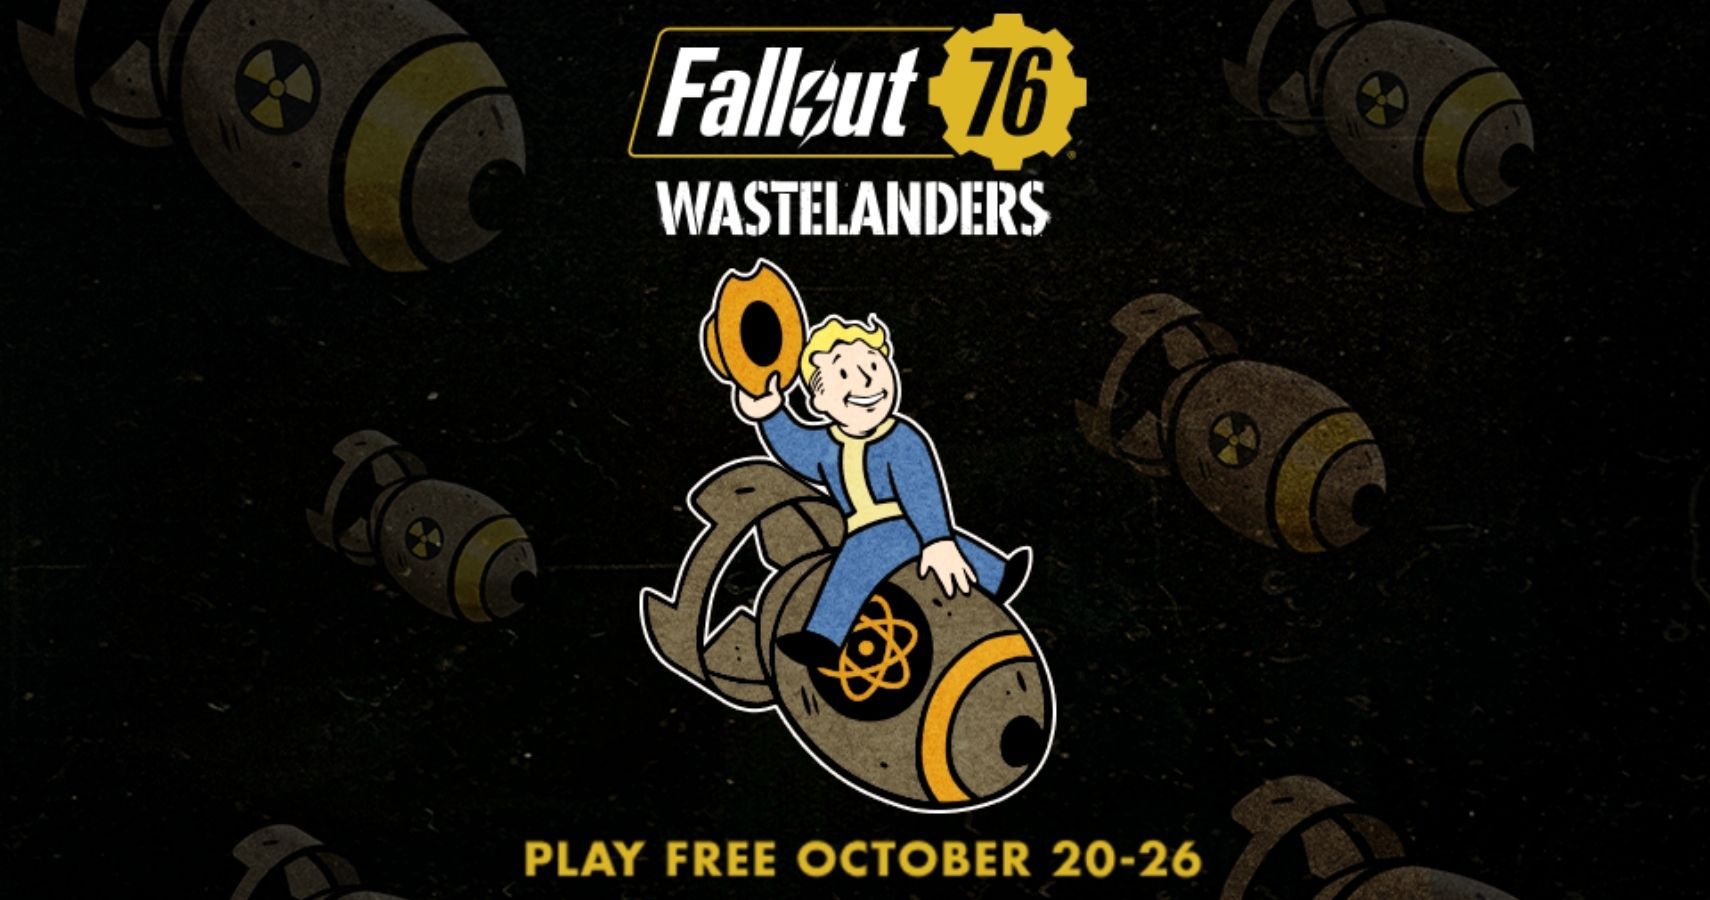 Bombs Drop Day Fallout 76 Free Play Week Celebration feature image